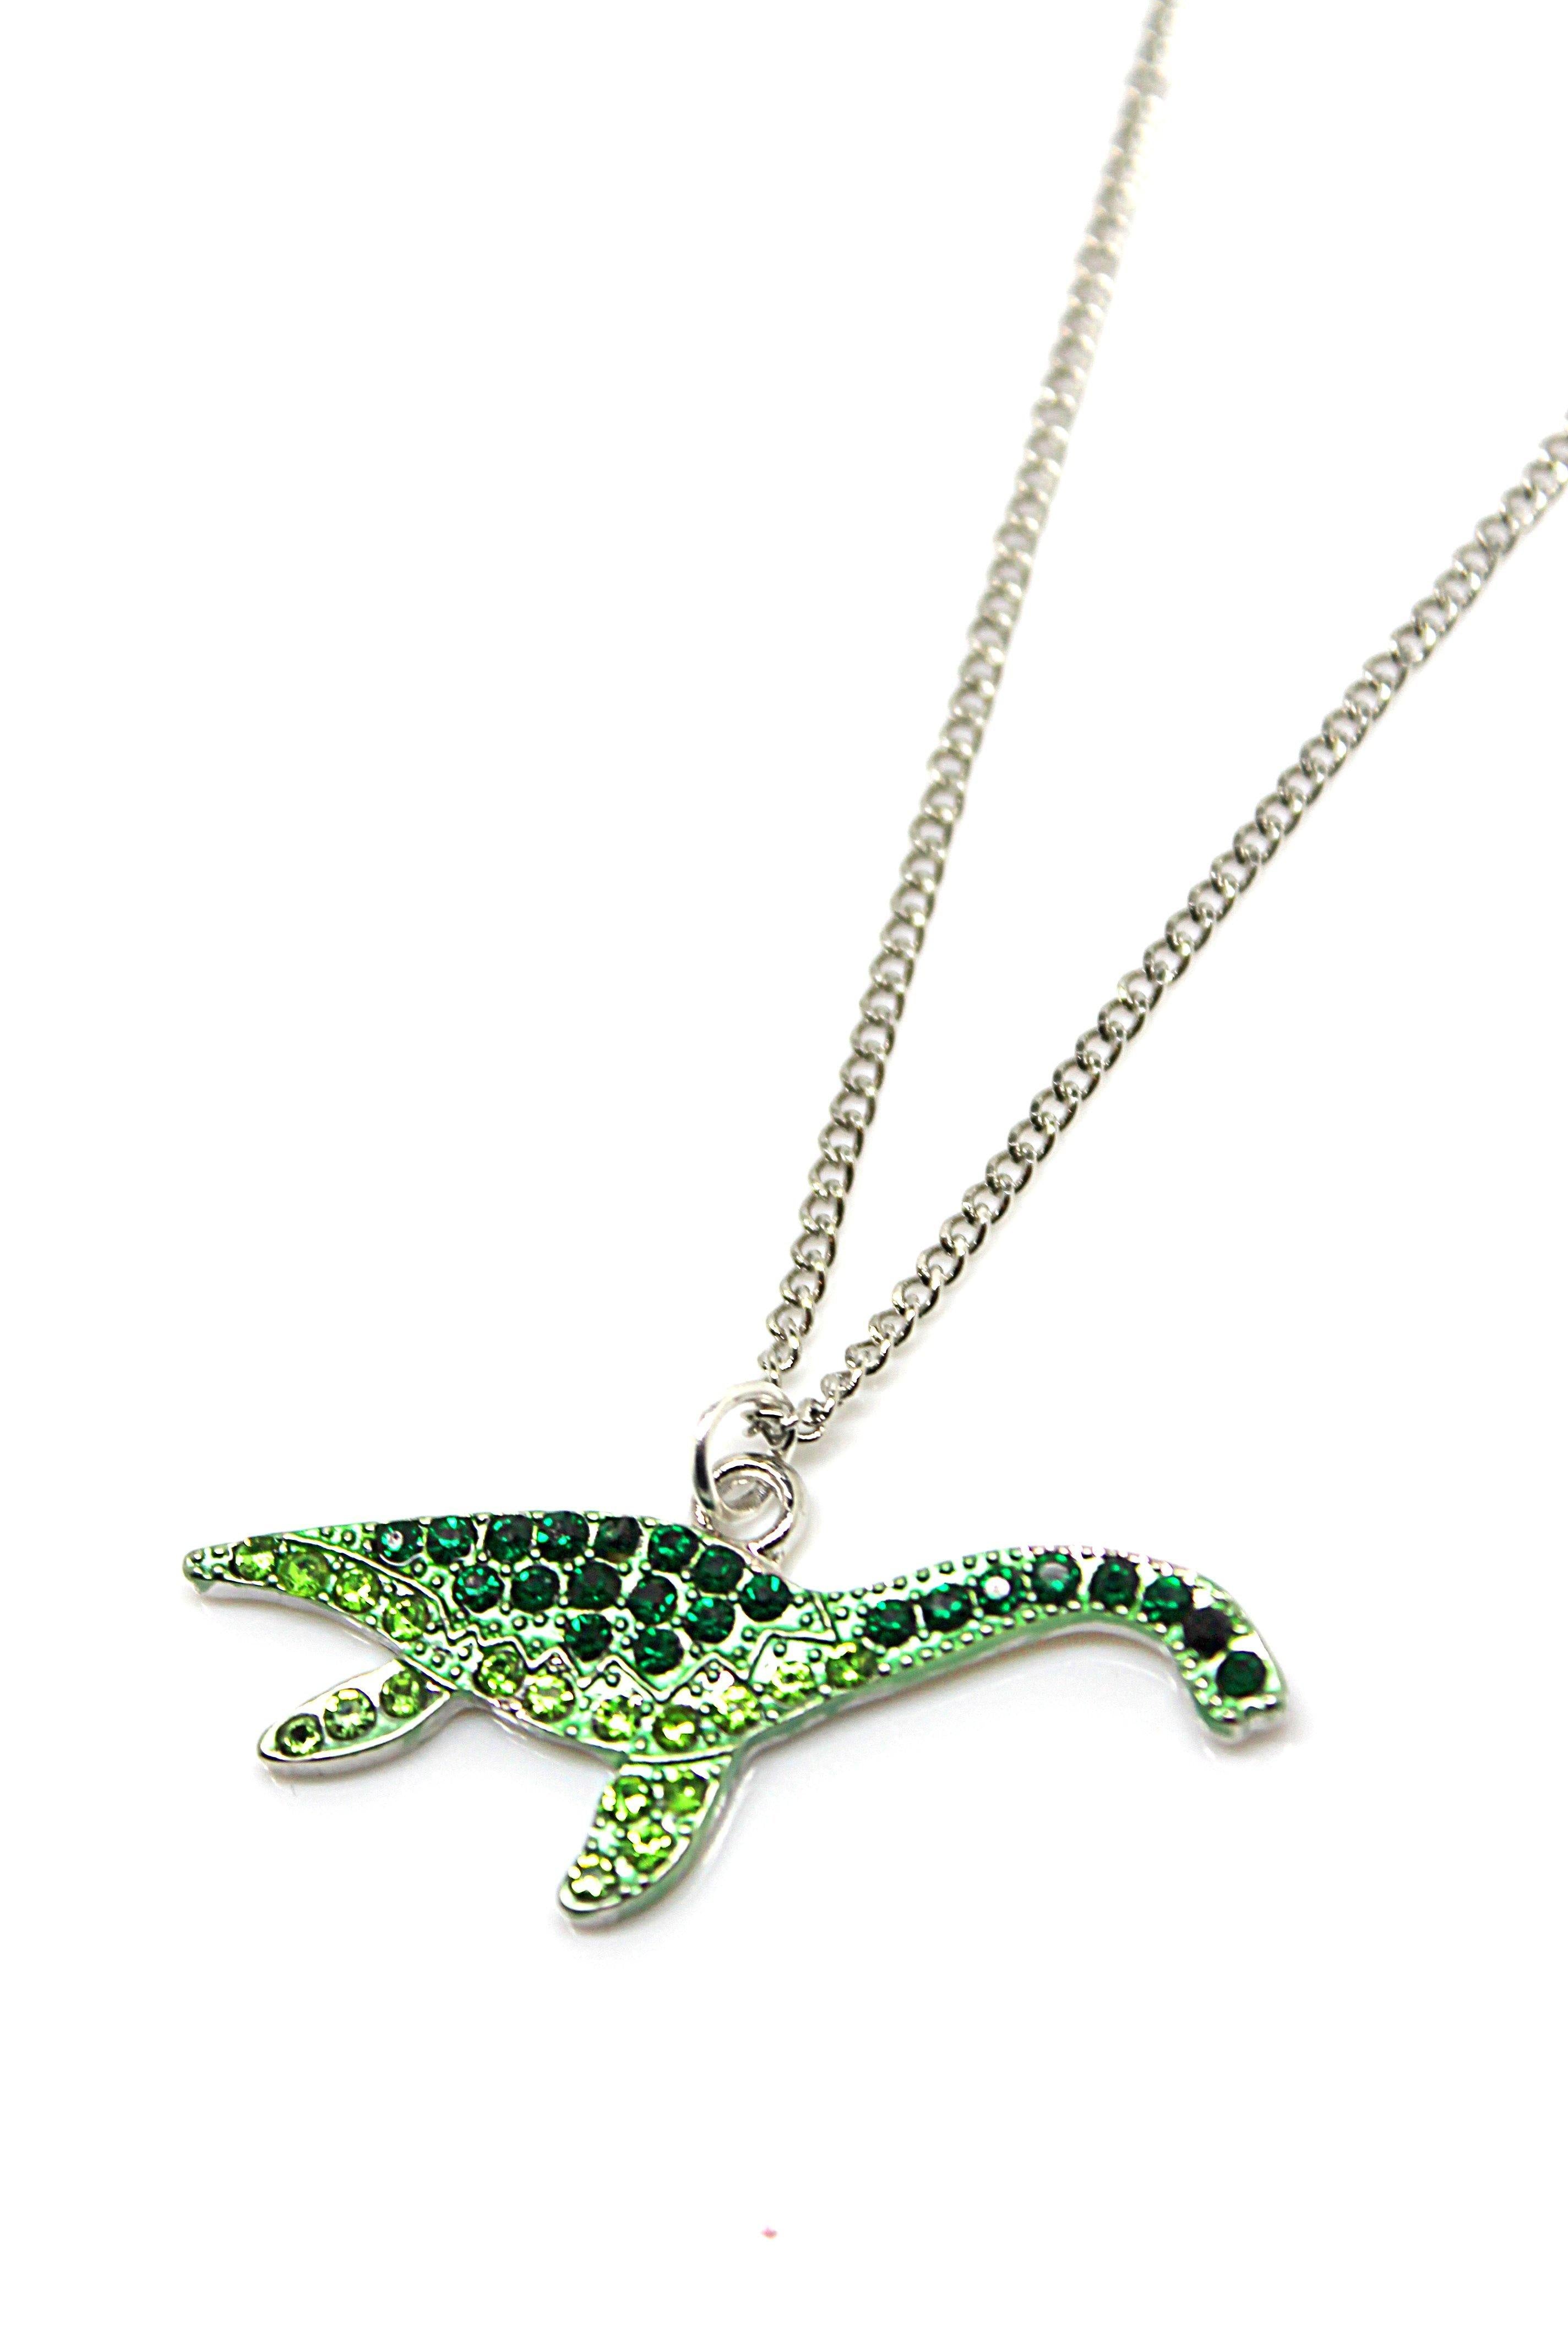 Lochness Necklace - Wildtouch - Wildtouch